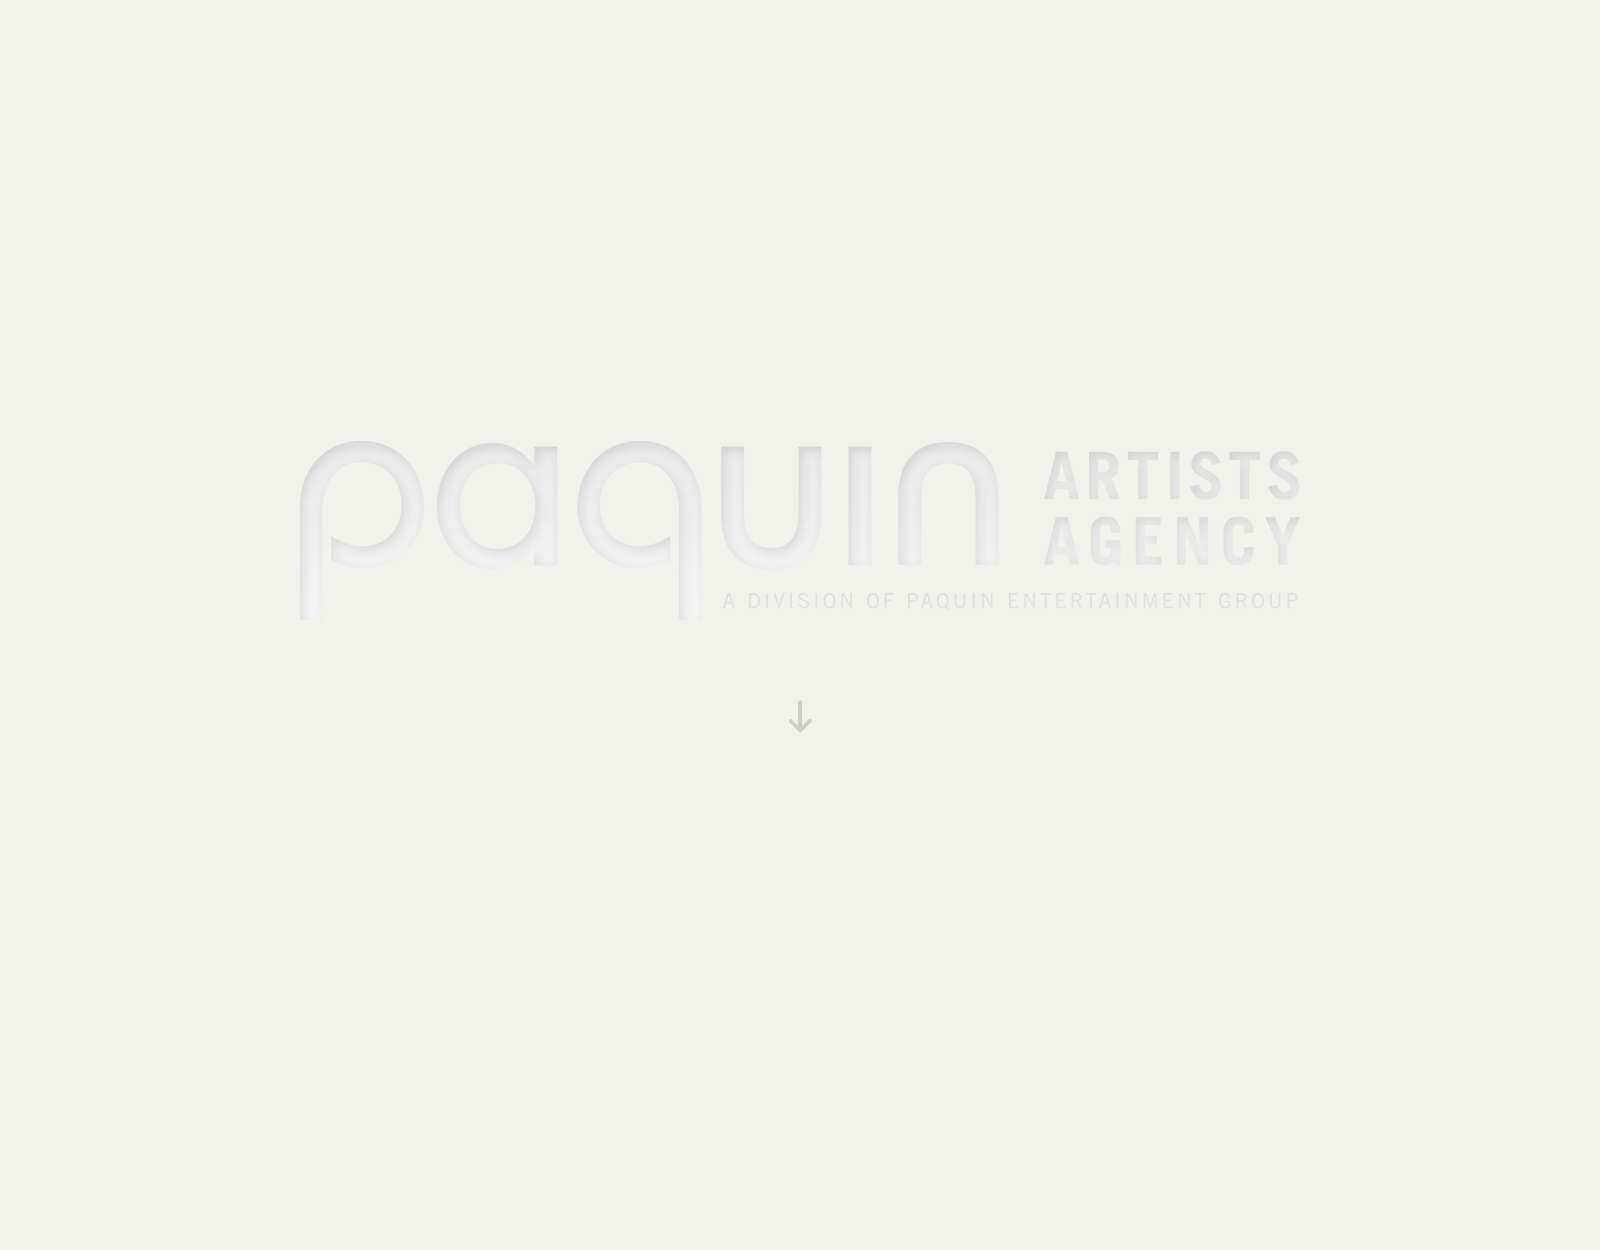 Paquin Artists Agency